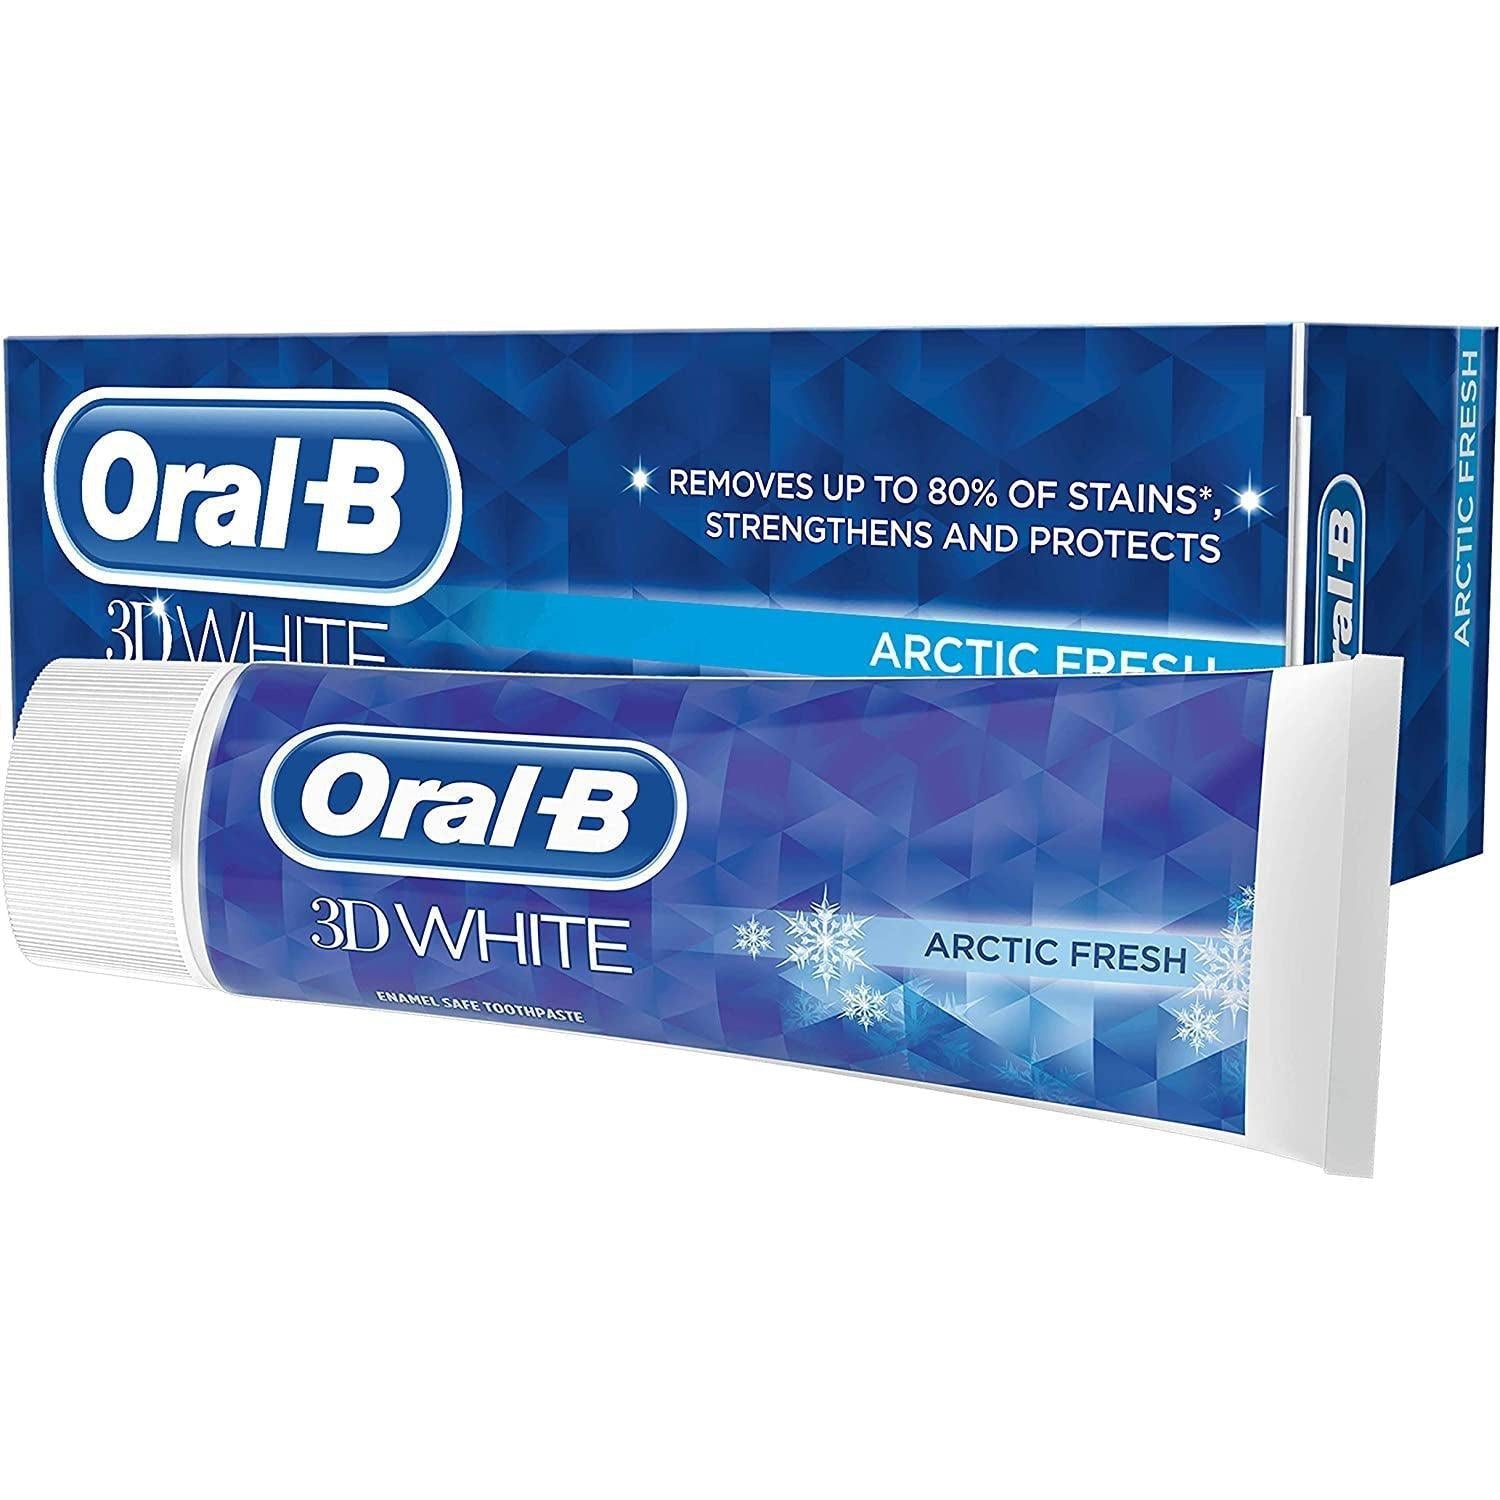 Oral-B 3D White Toothpaste, Arctic Fresh, 75ml - Clinically Proven - Healthxpress.ie